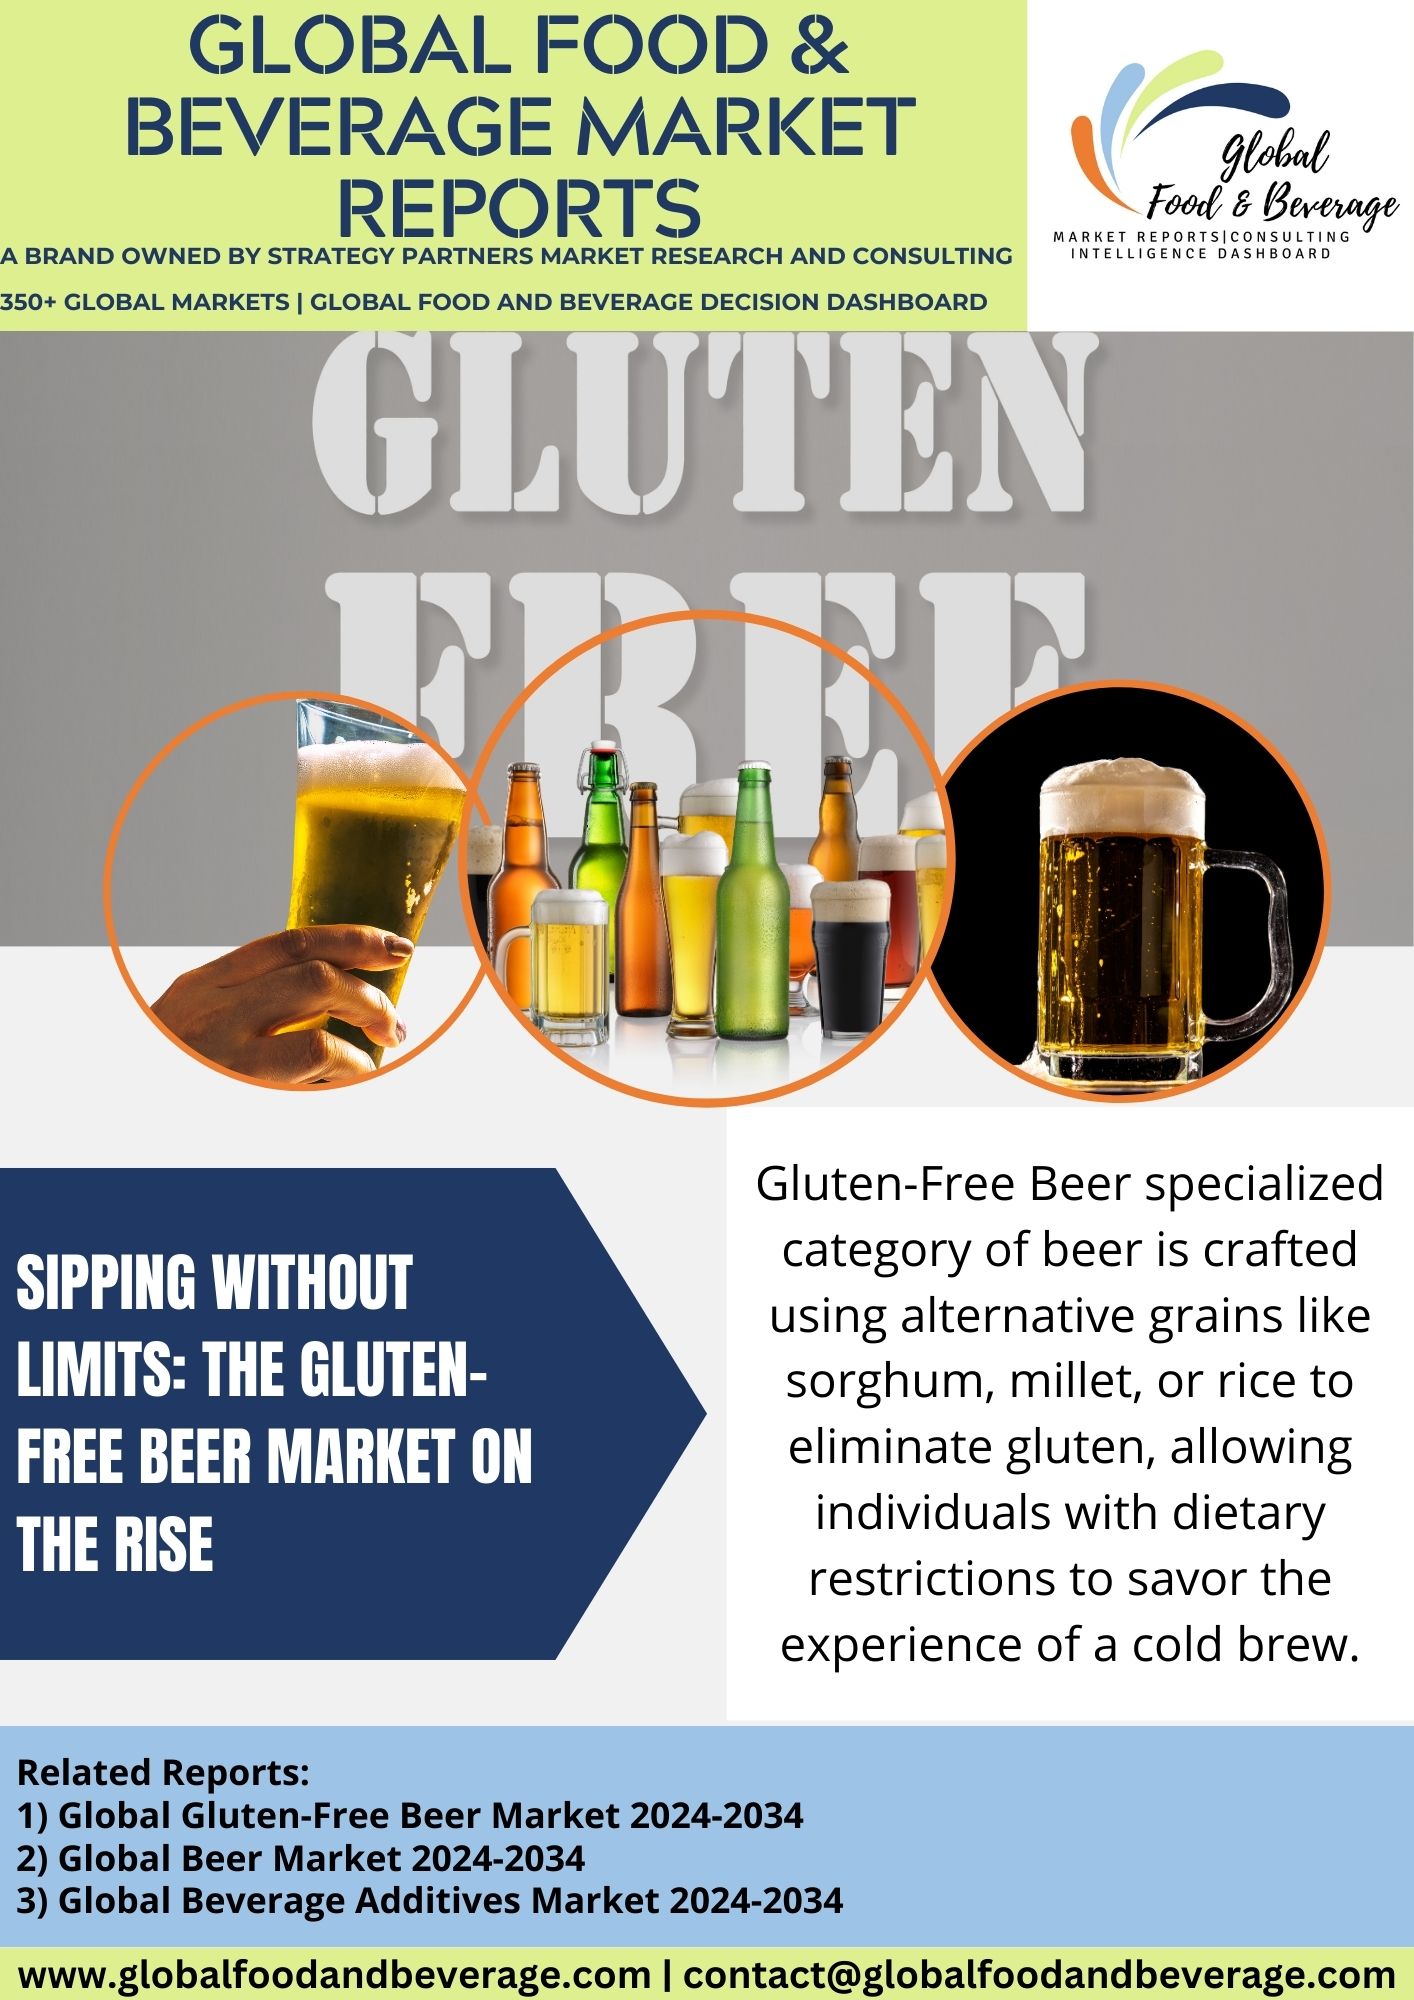 Sipping Without Limits: The Gluten-Free Beer Market on the Rise